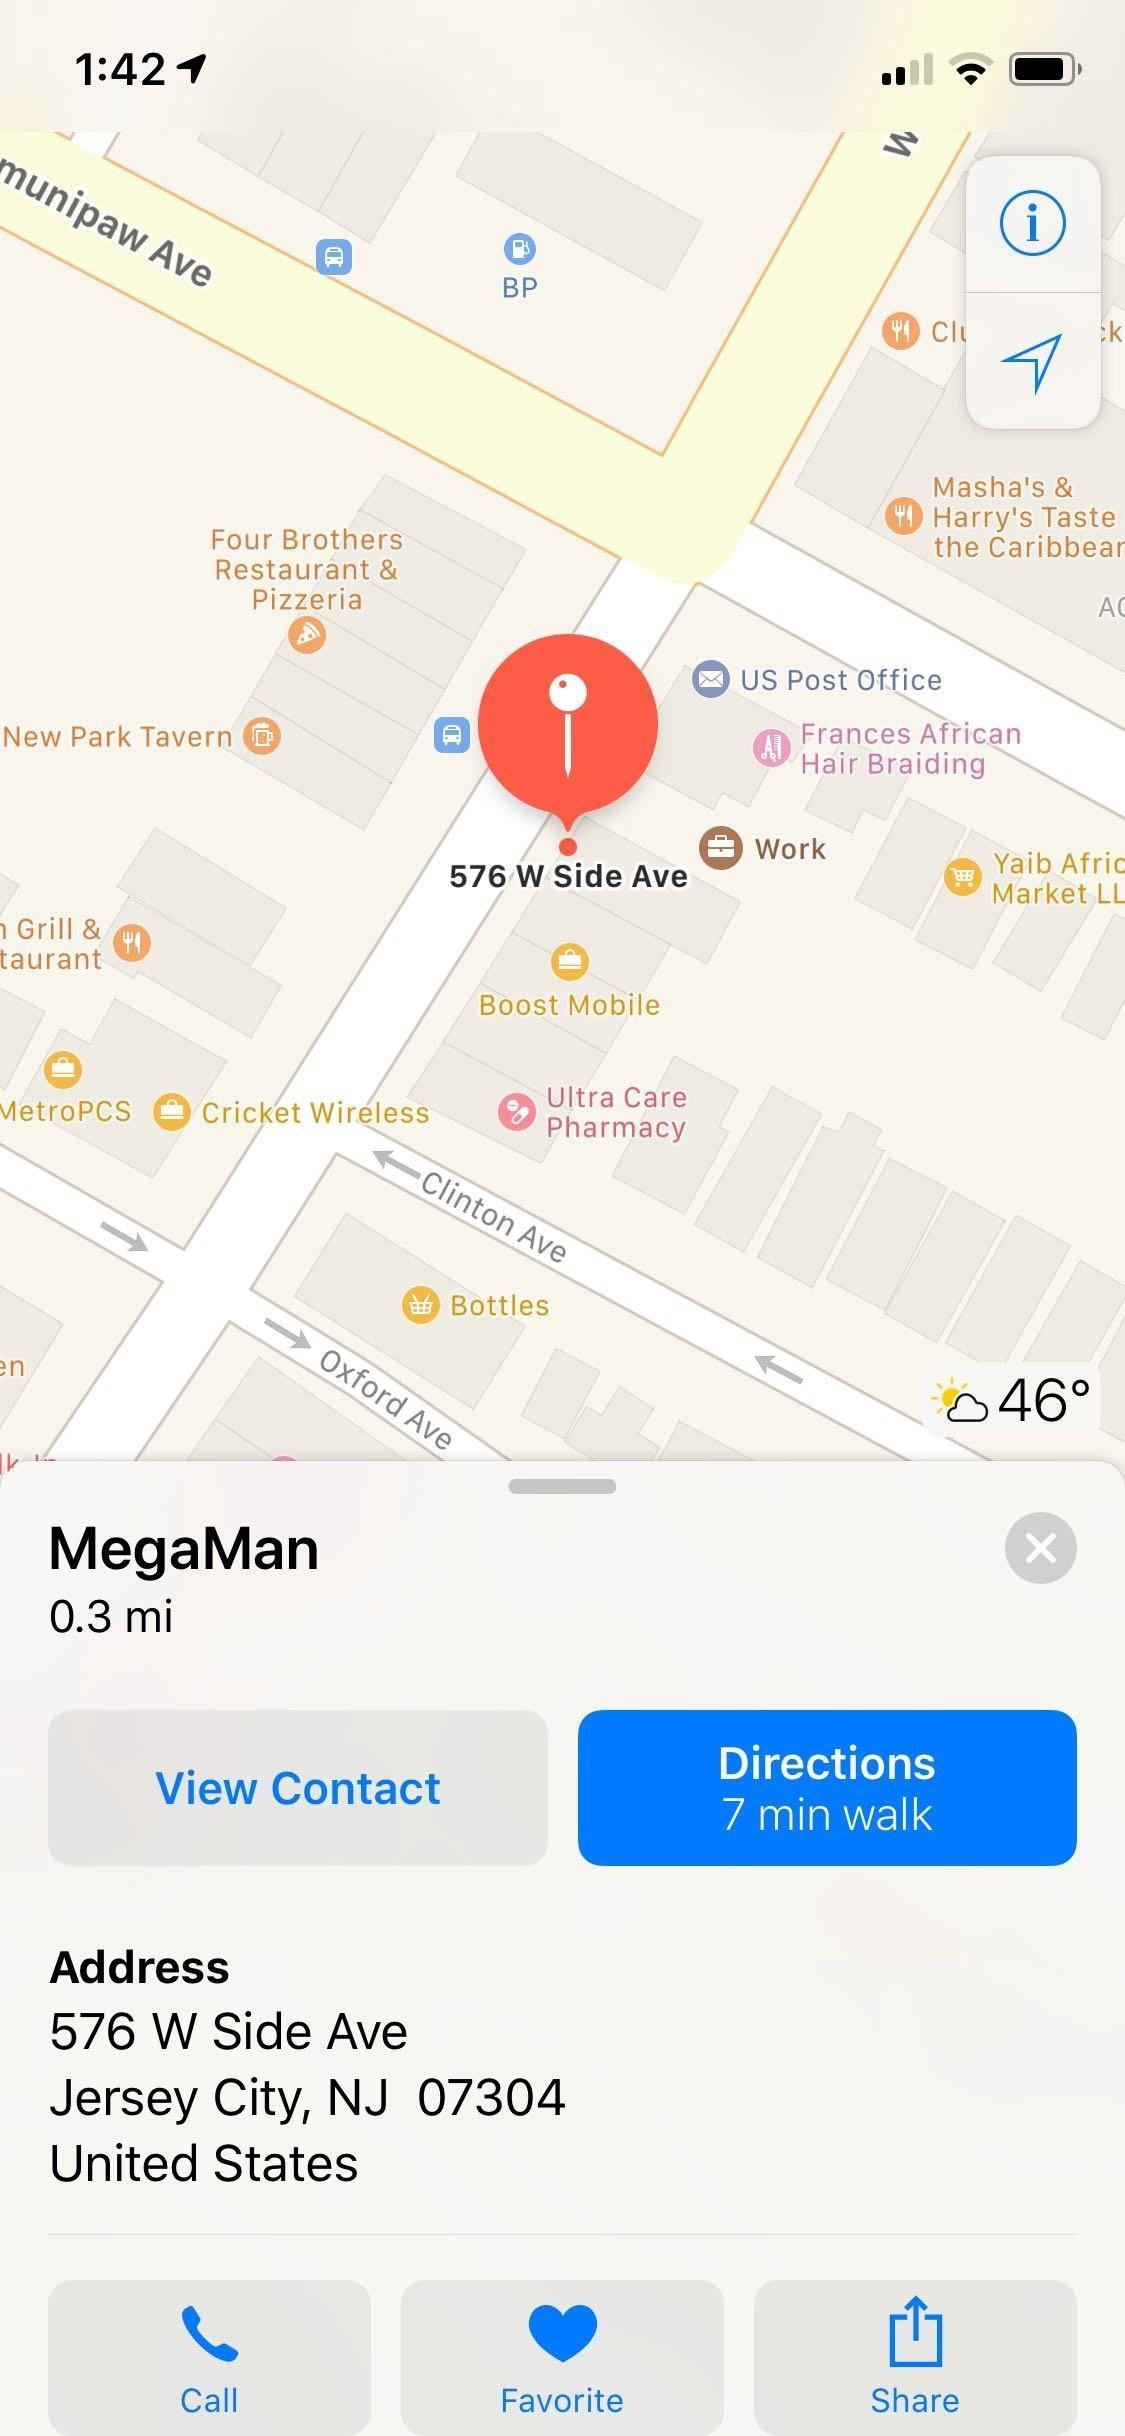 How to Set or Change Your Home & Work Addresses on Apple Maps